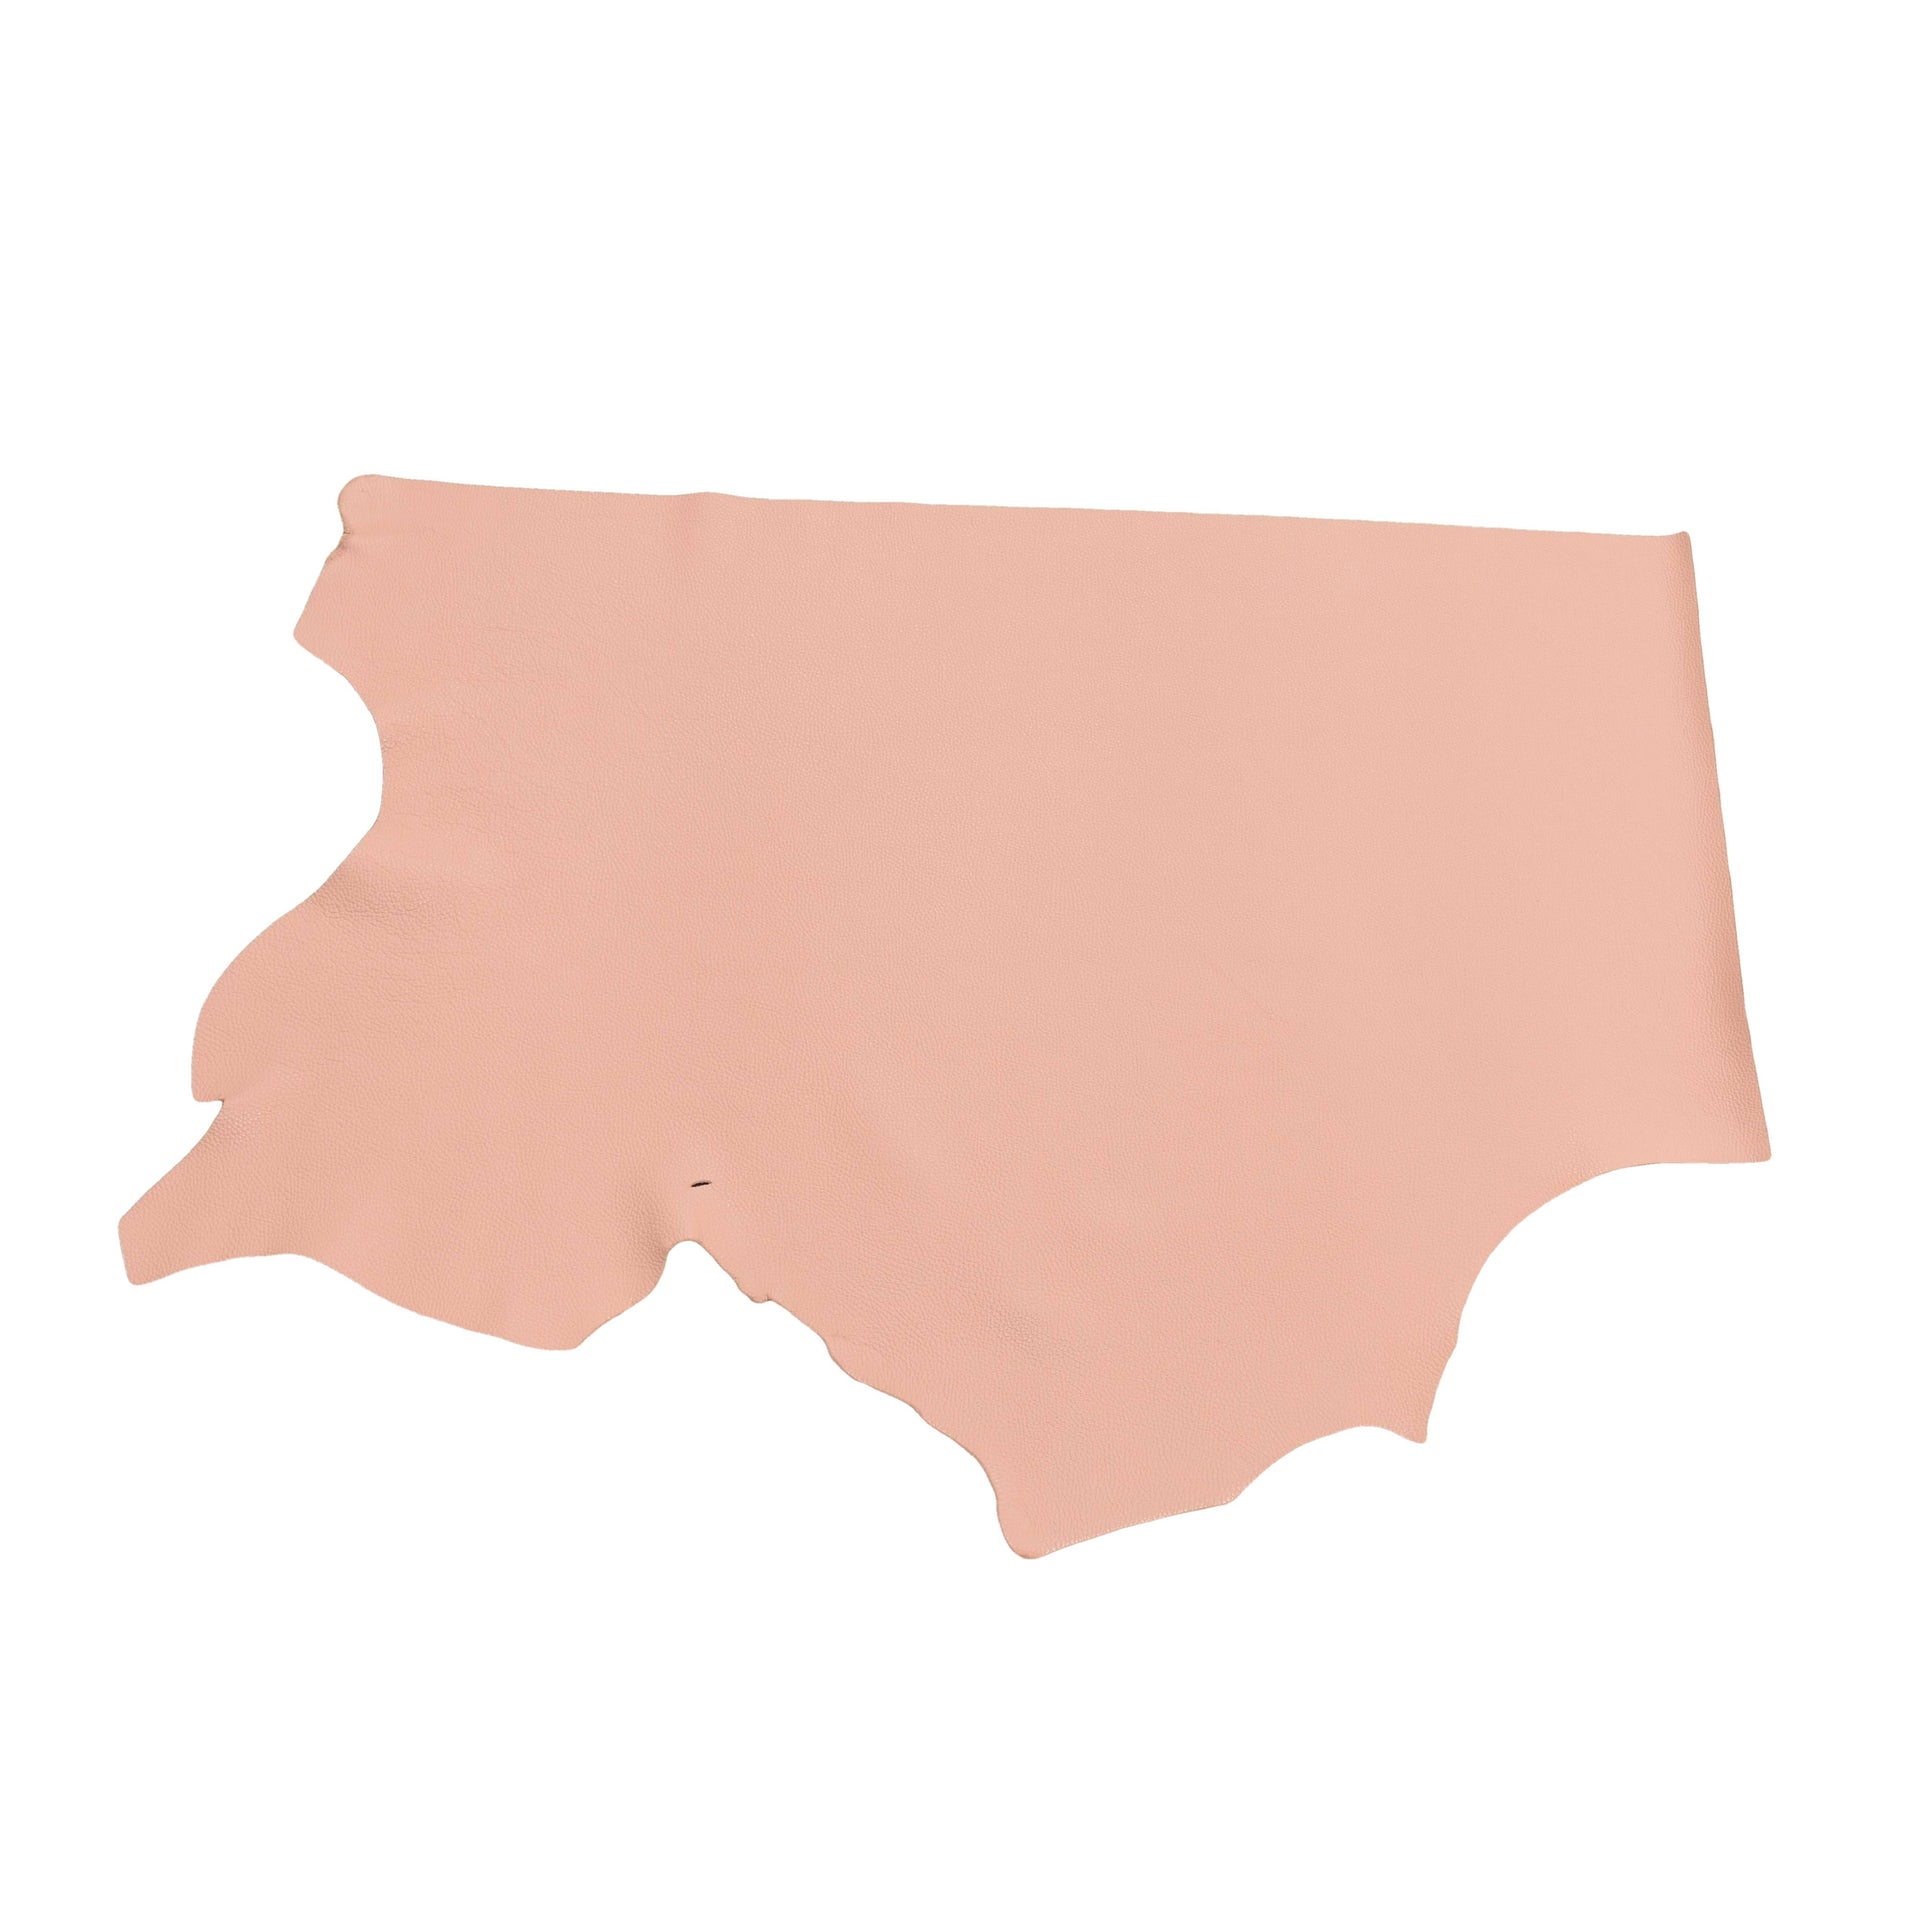 San Diego Sweet Pink Tried n True 3-4 oz Leather Cow Hides, Bottom Piece / 6.5-7.5 Square Foot | The Leather Guy